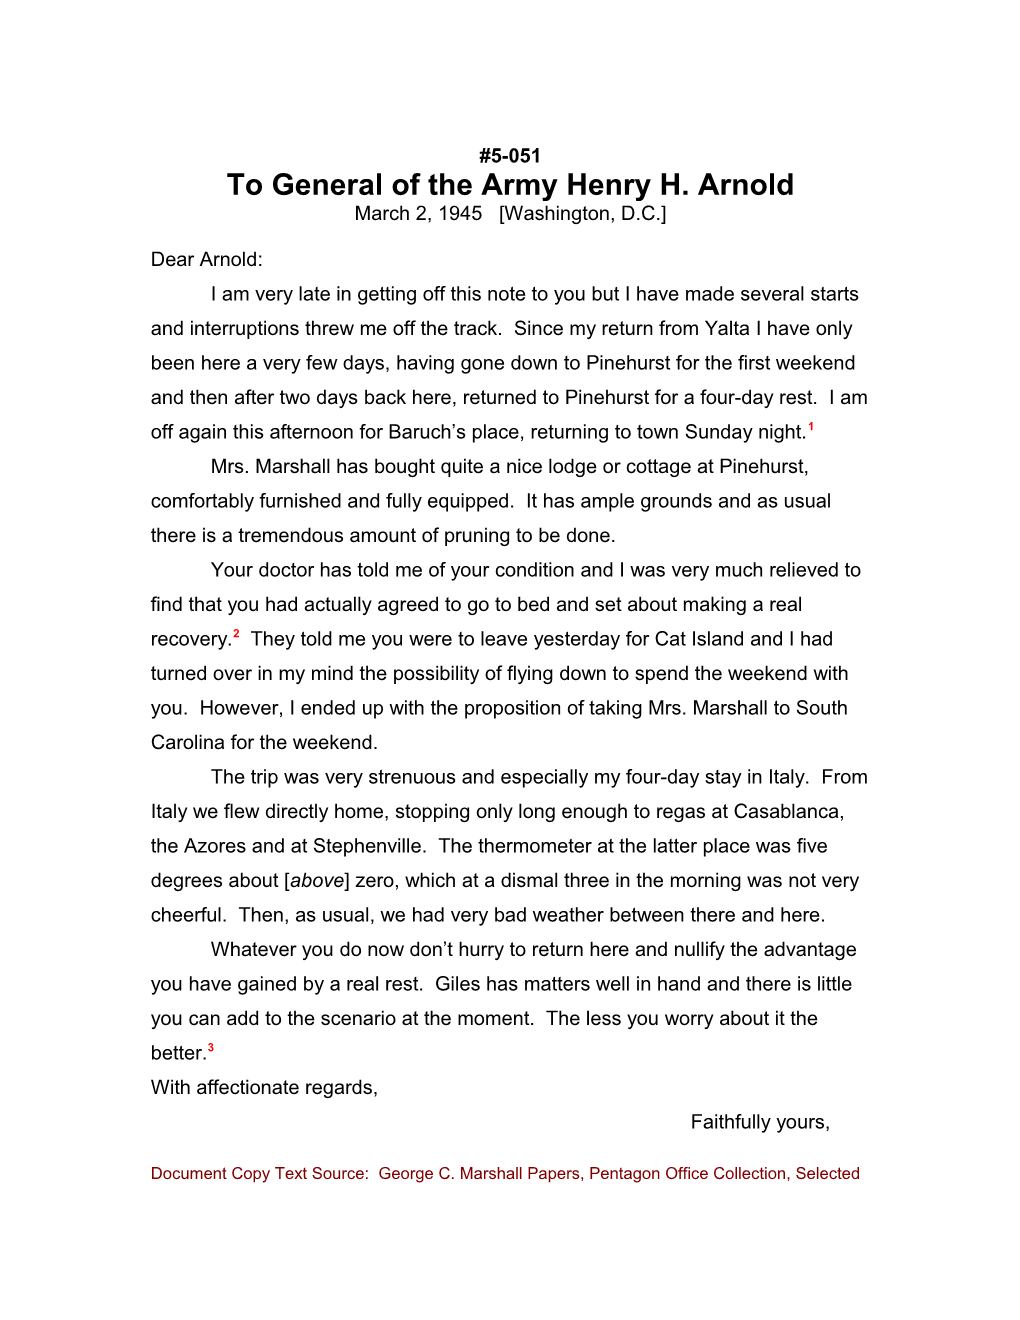 To General of the Army Henry H. Arnold